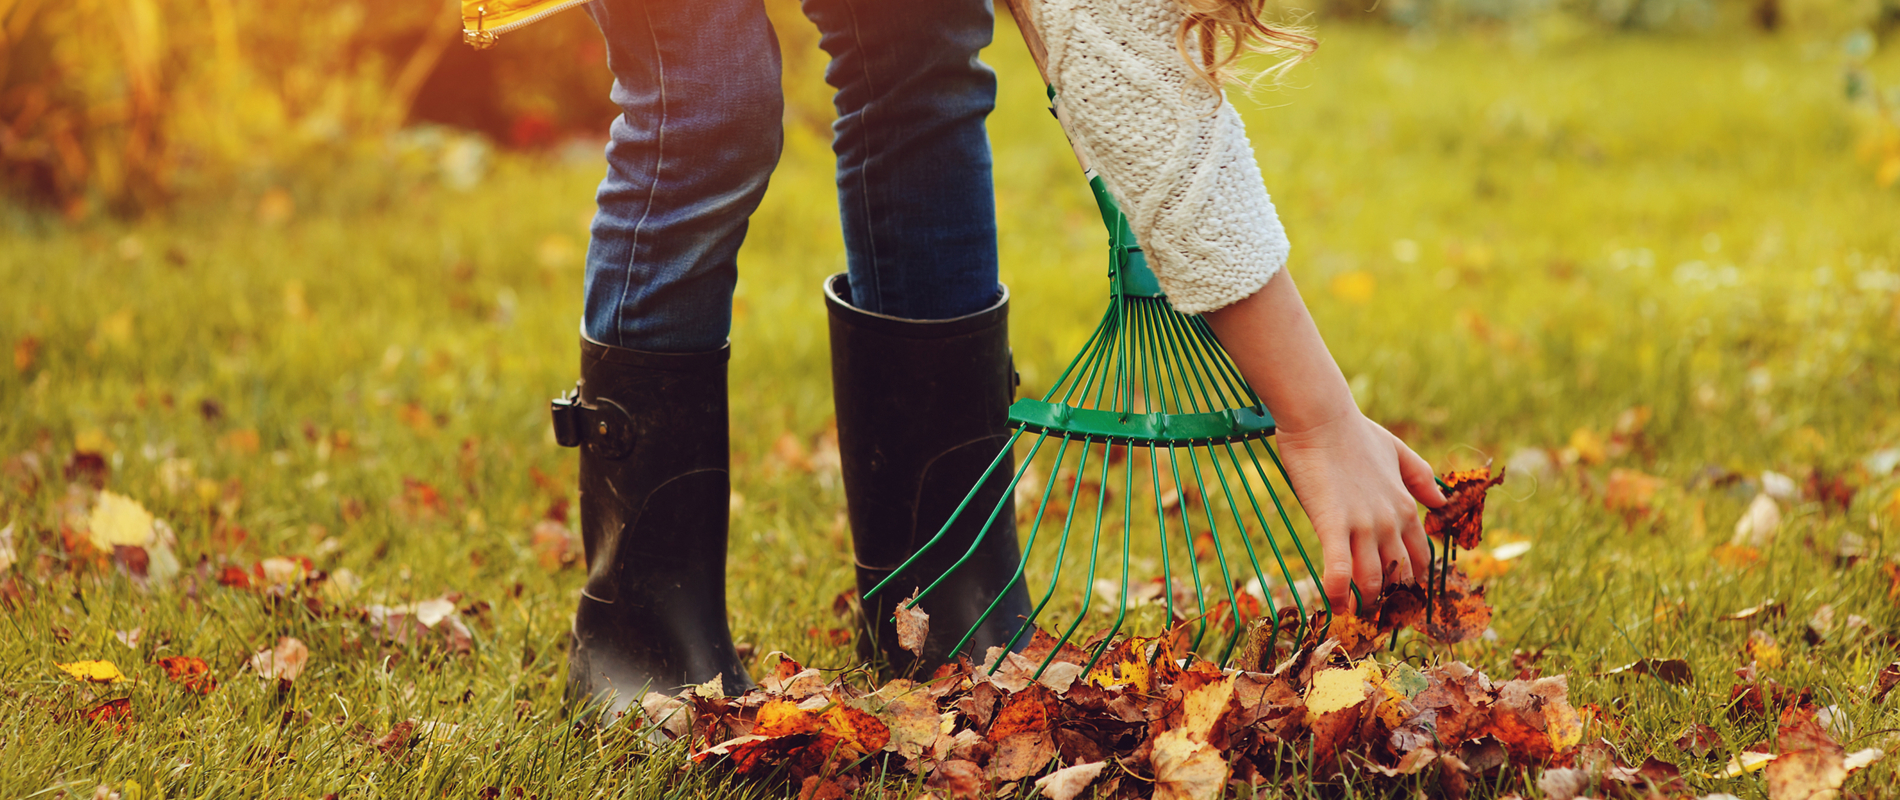 Maryland Heights, MO fall lawn care - fall lawn maintenance